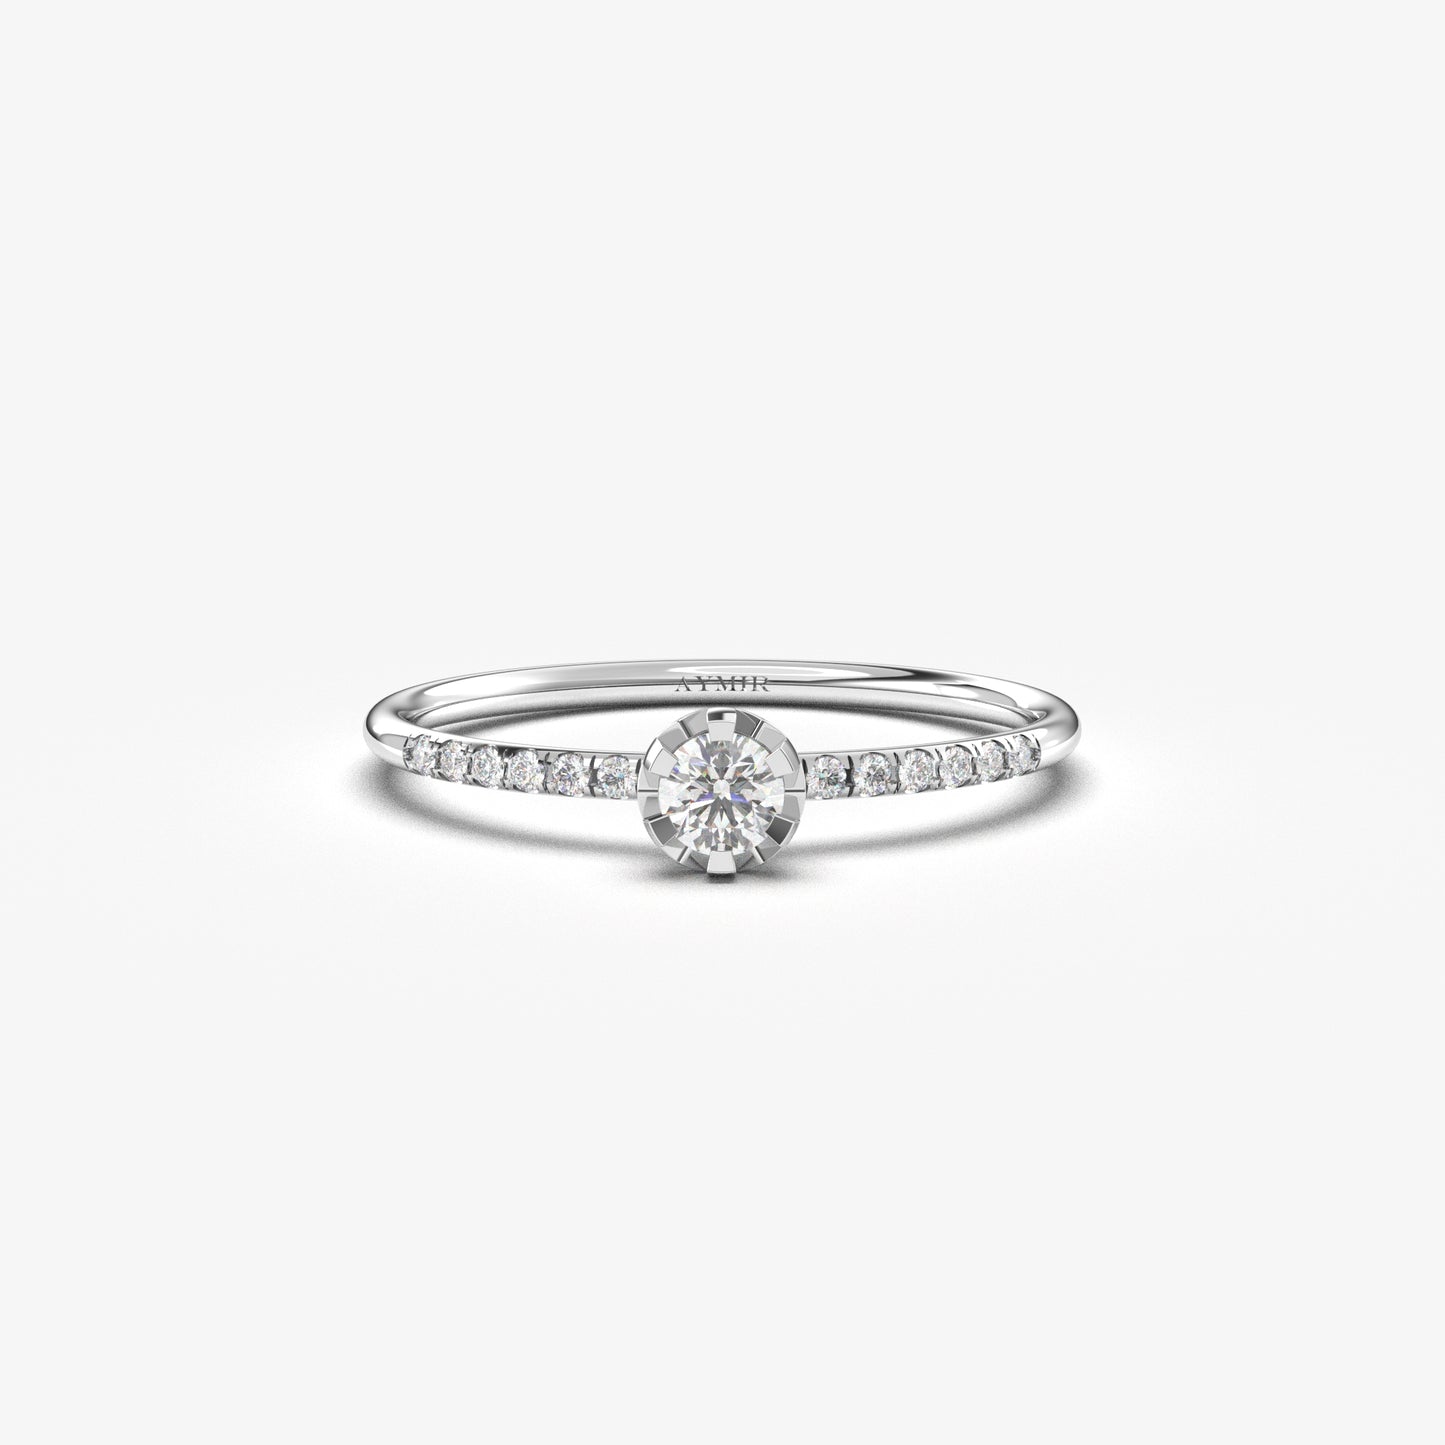 14K Gold Engagement CZ Ring - 2S181